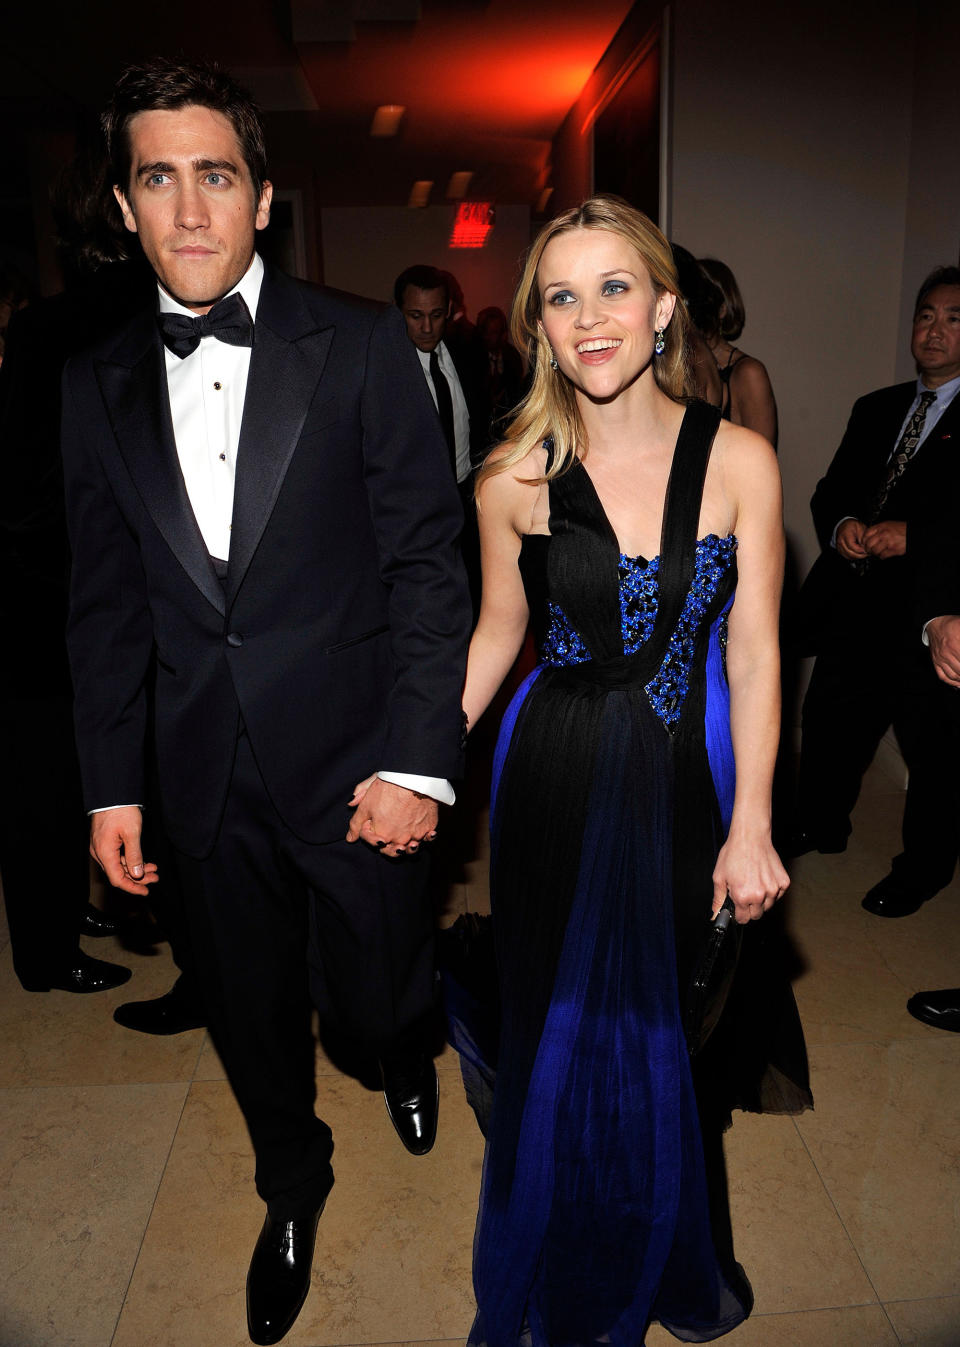 Reese Witherspoon and Jake Gyllenhaal: 5 Years